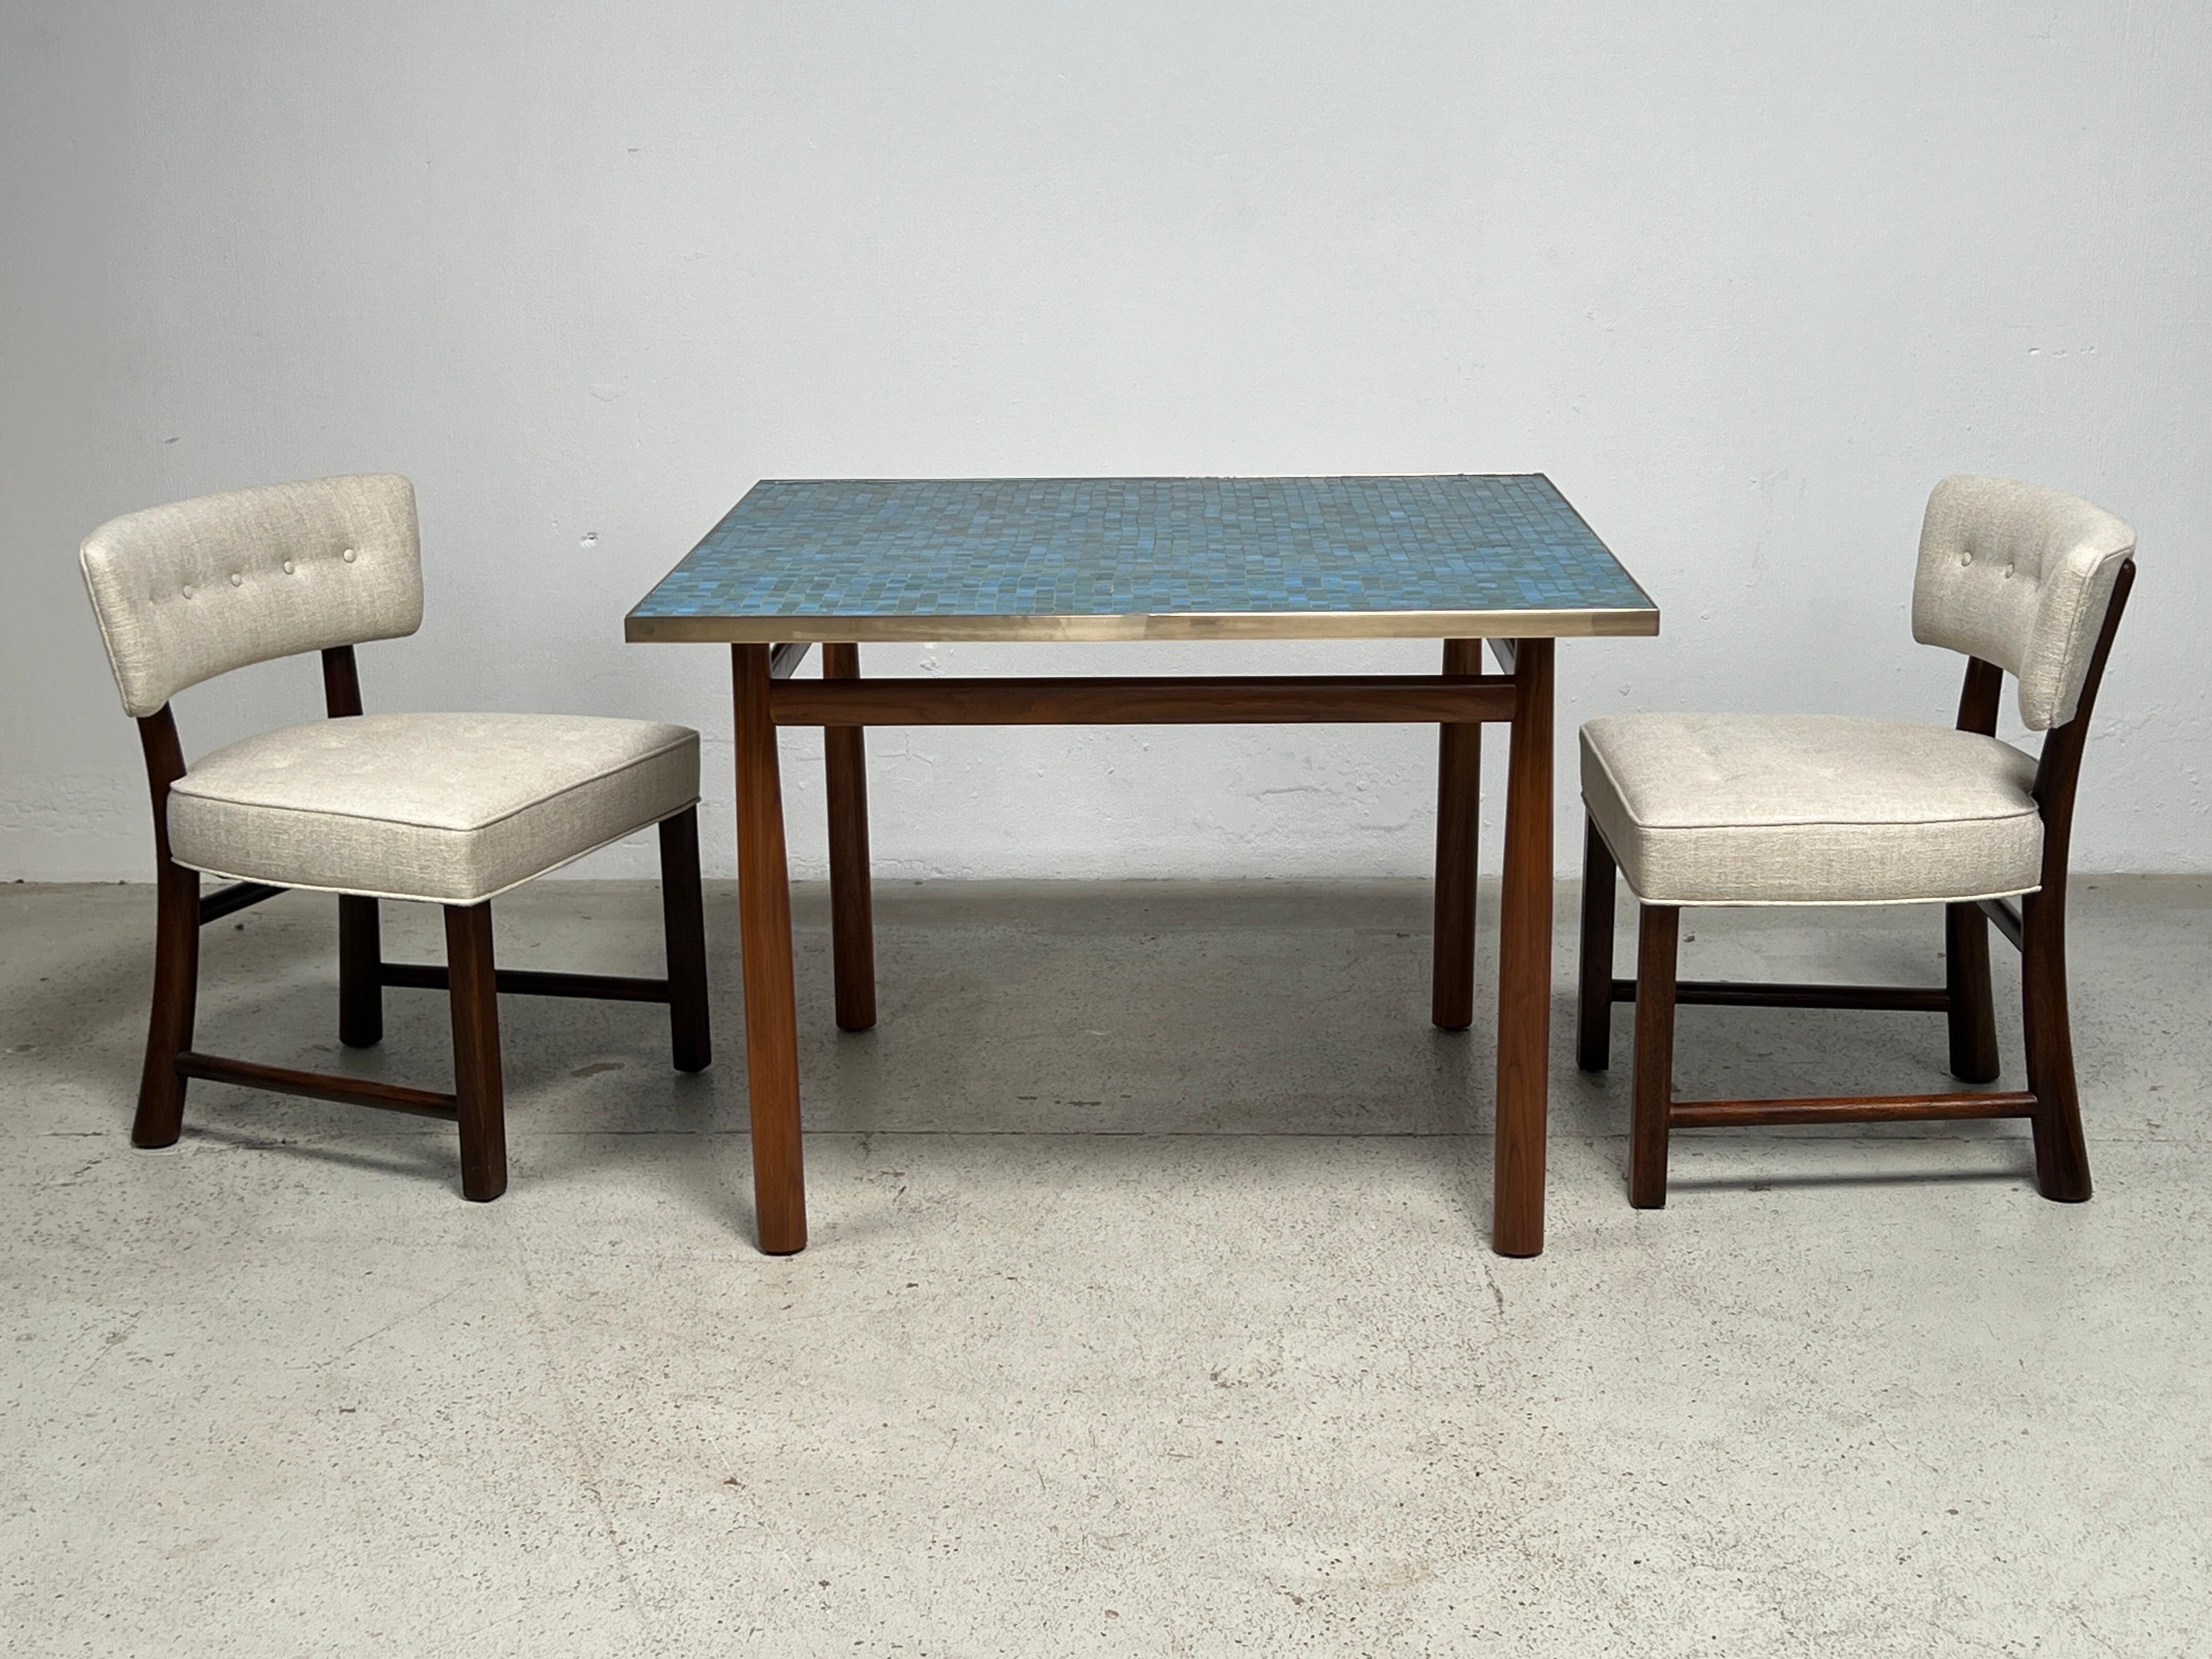 A rare Murano glass tile top game / dining table with brass edging and tapered mahogany legs. Designed by Edward Wormley for Dunbar with early green Dunbar label. This is the largest Murano tile table Dunbar offered and there has not been another on